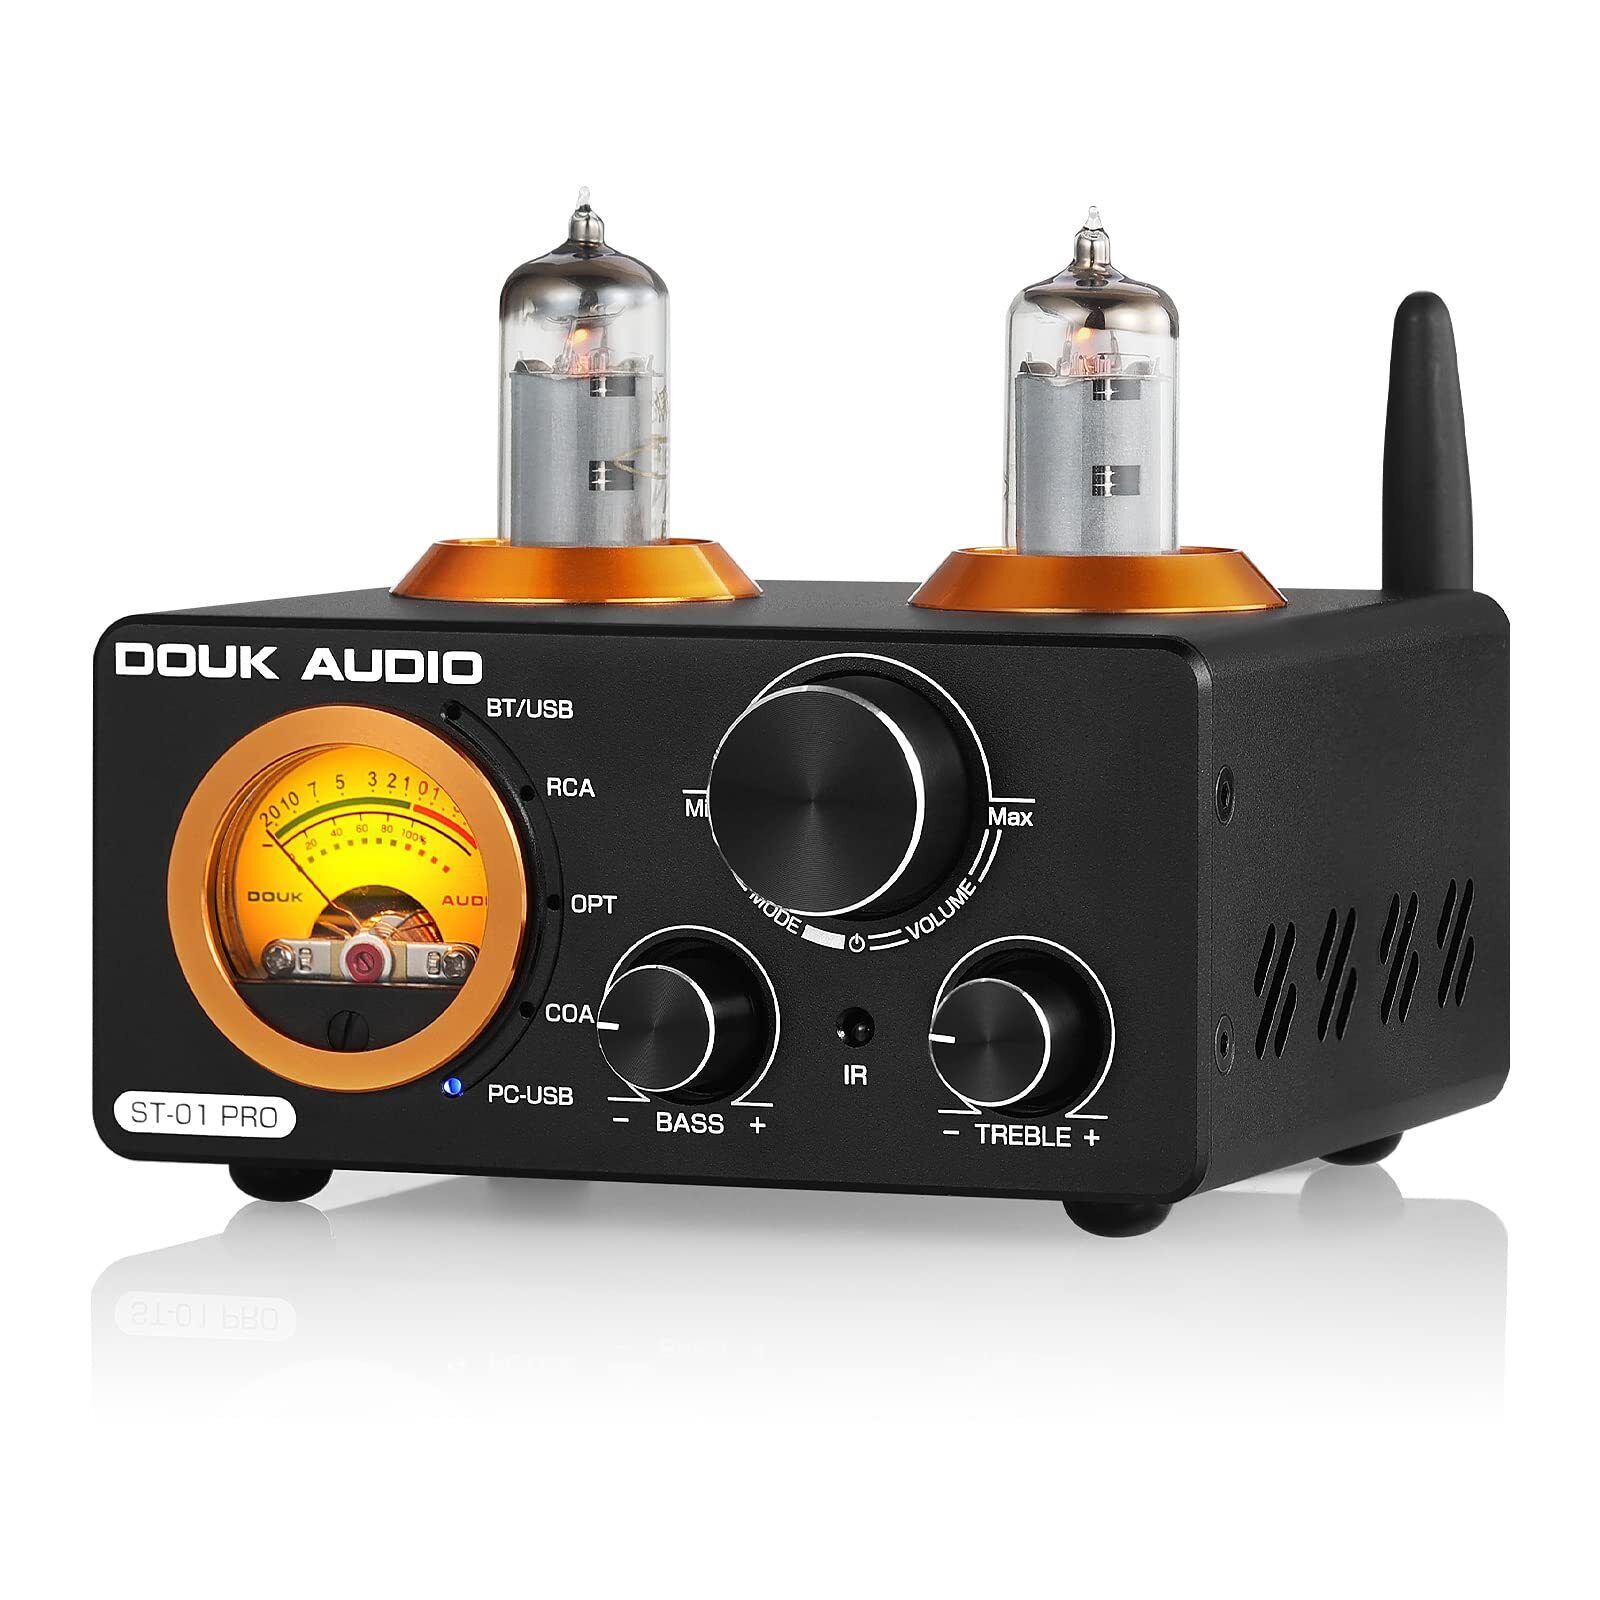 ST-01 PRO 200W Bluetooth Amplifier, 2 Channel Vacuum Tube Power Amp with USB ...